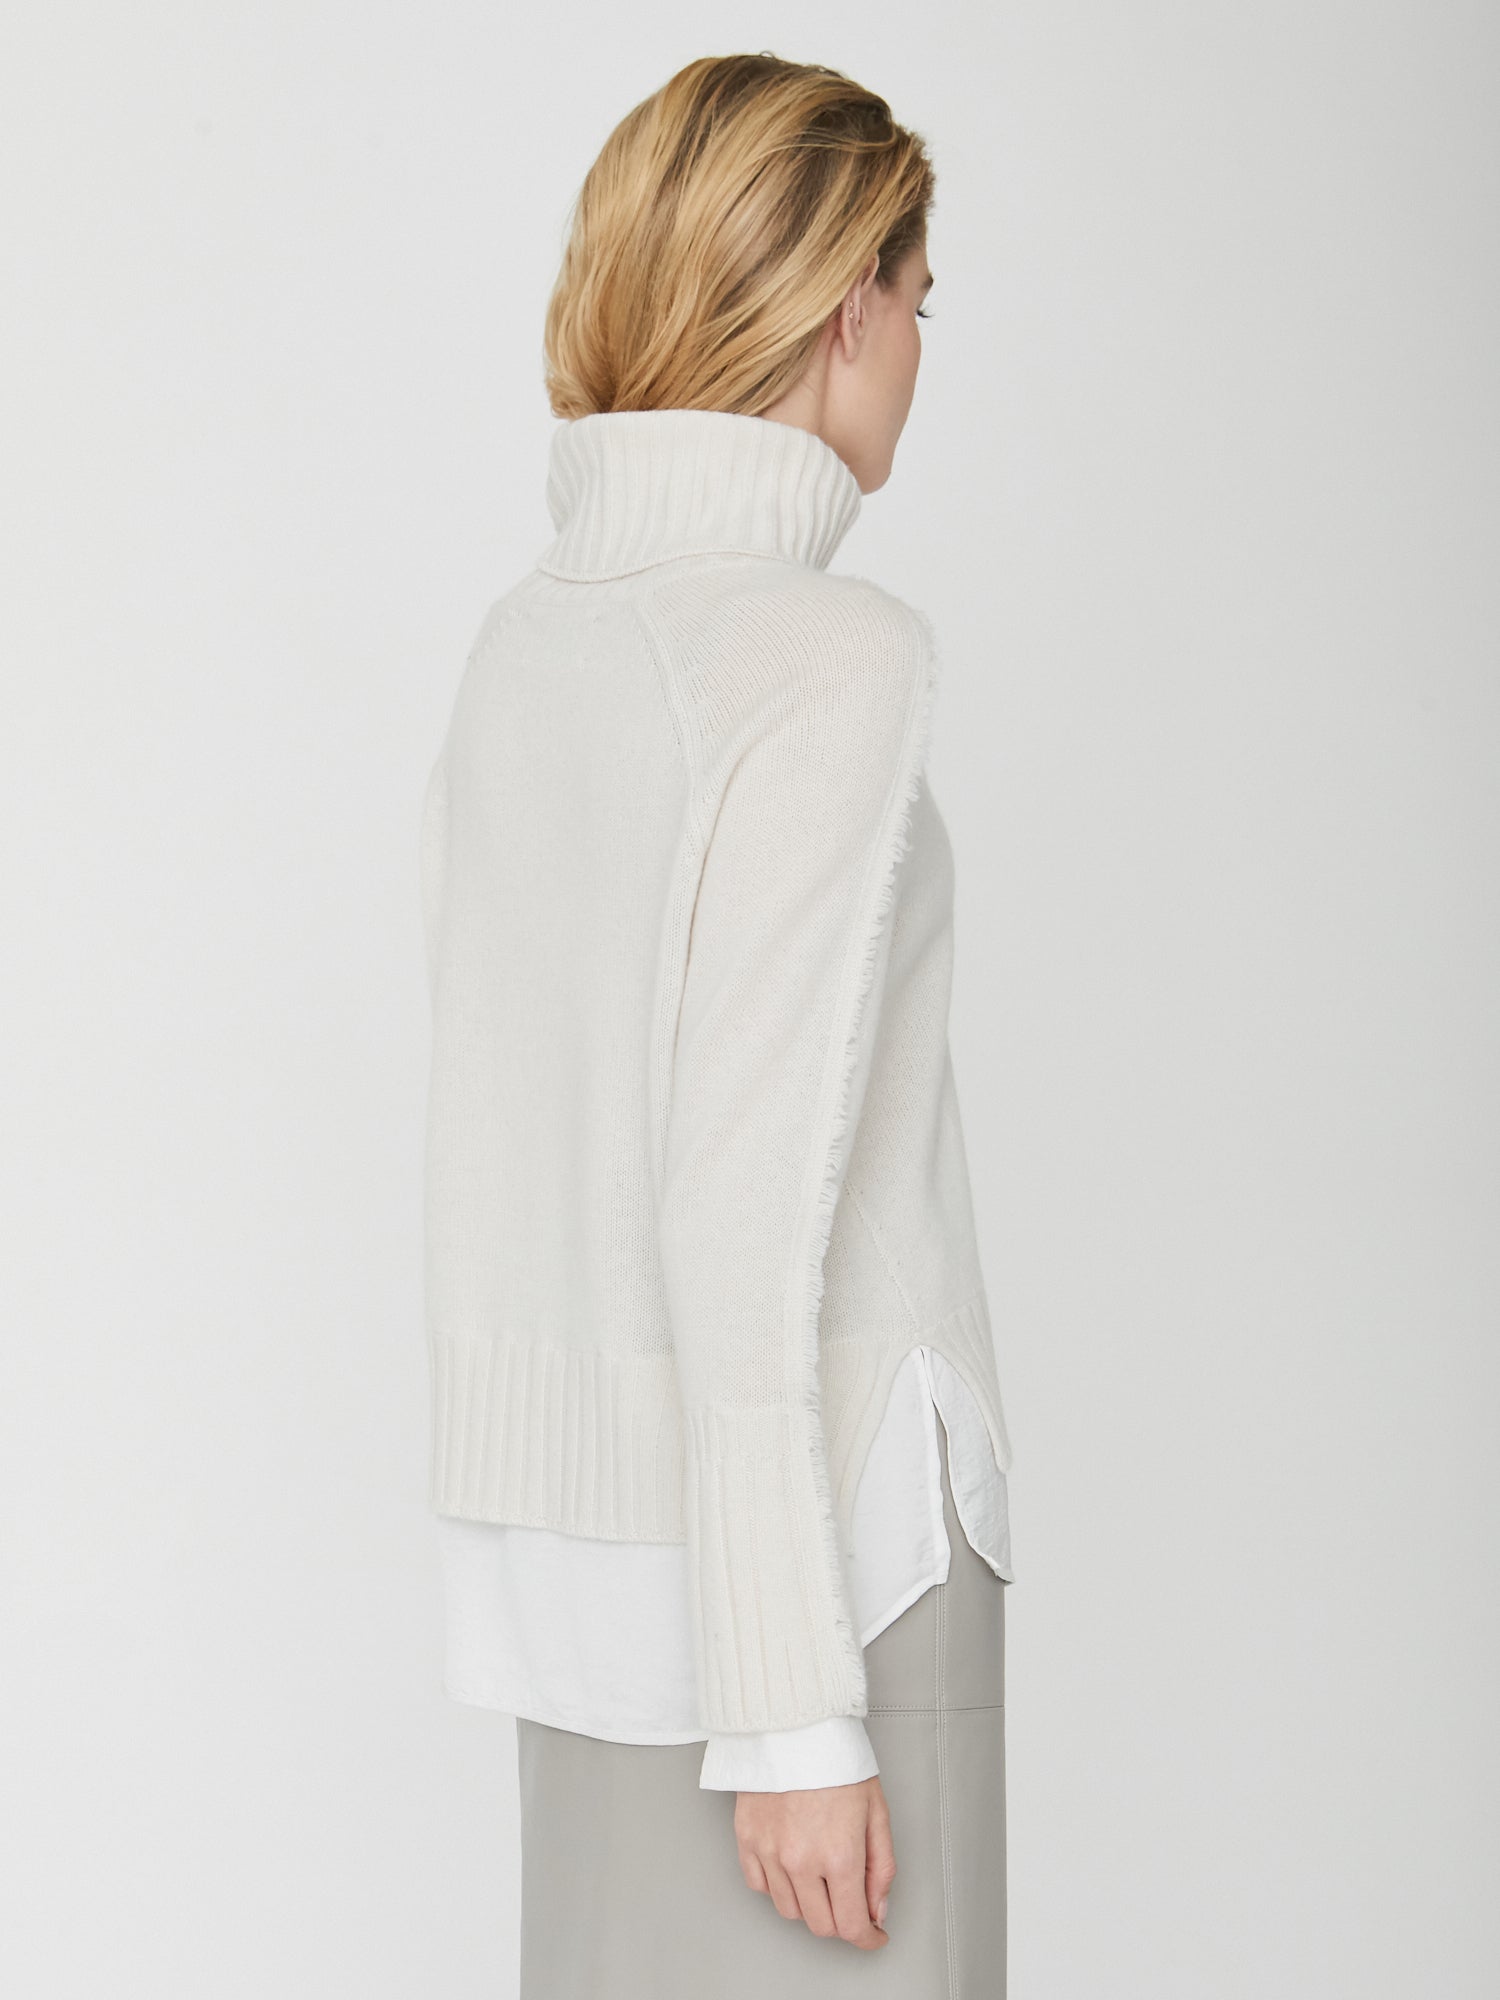 Jolie white layered turtleneck sweater back view